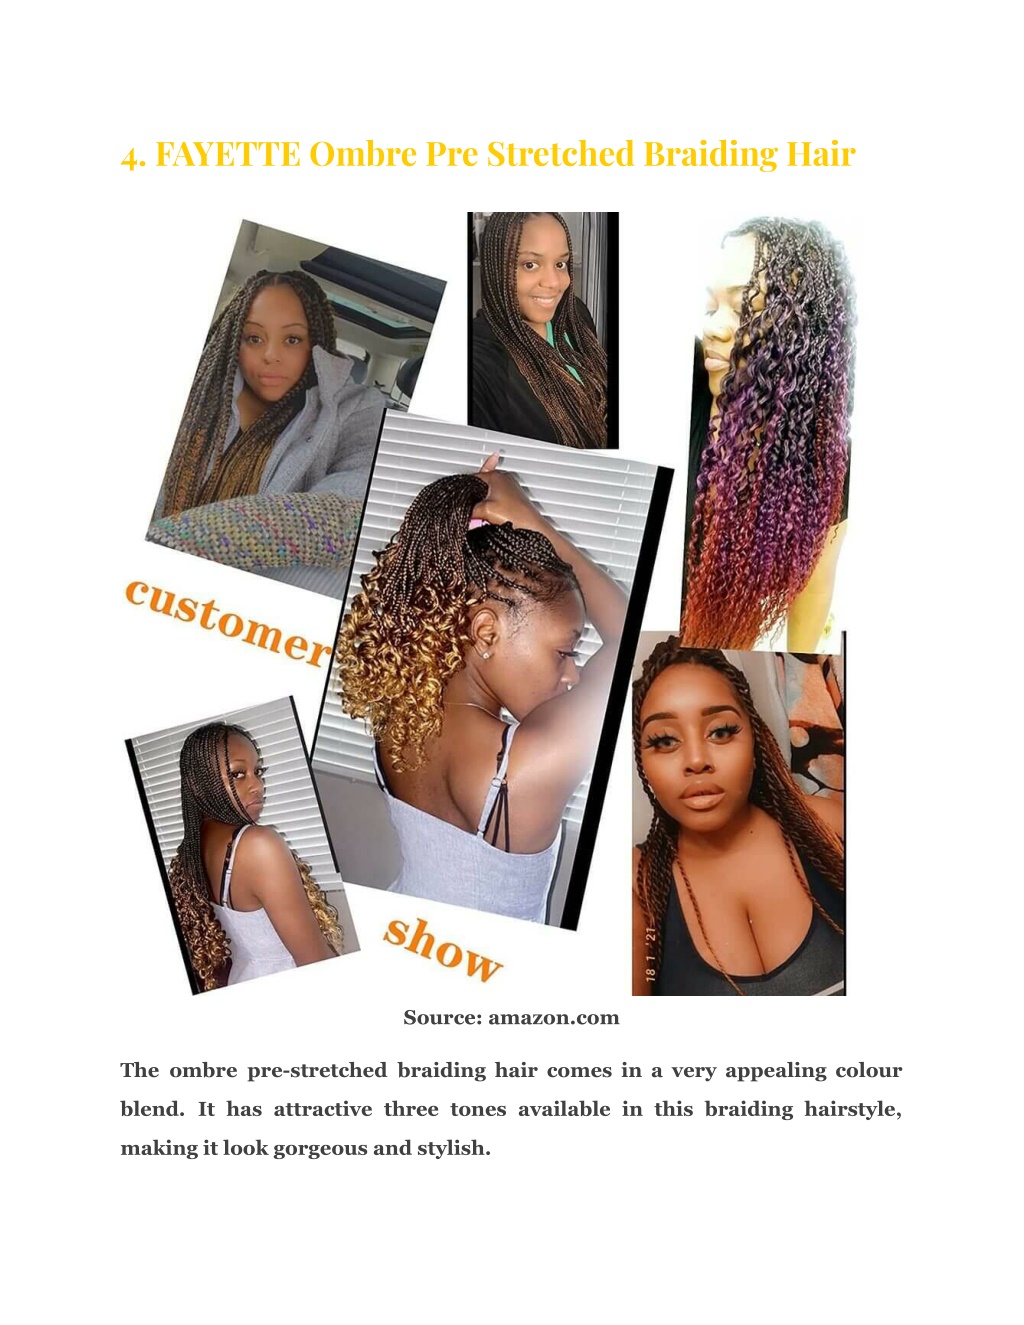 Ppt 14 Pre Stretched Braiding Hair That Suits Everyone Powerpoint Presentation Id11111161